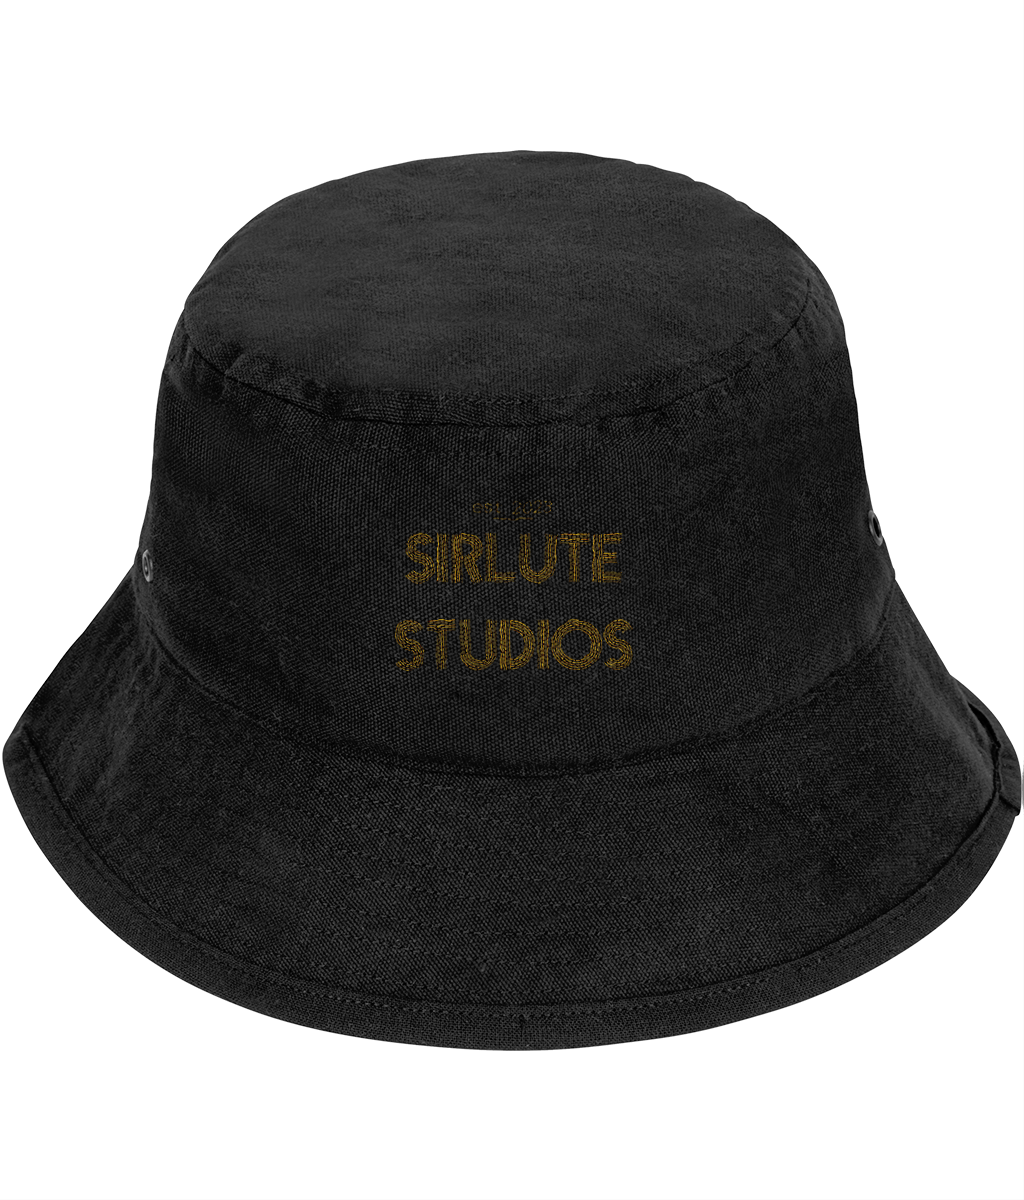 Sirlute Studios Bucket Hat | Embroidered